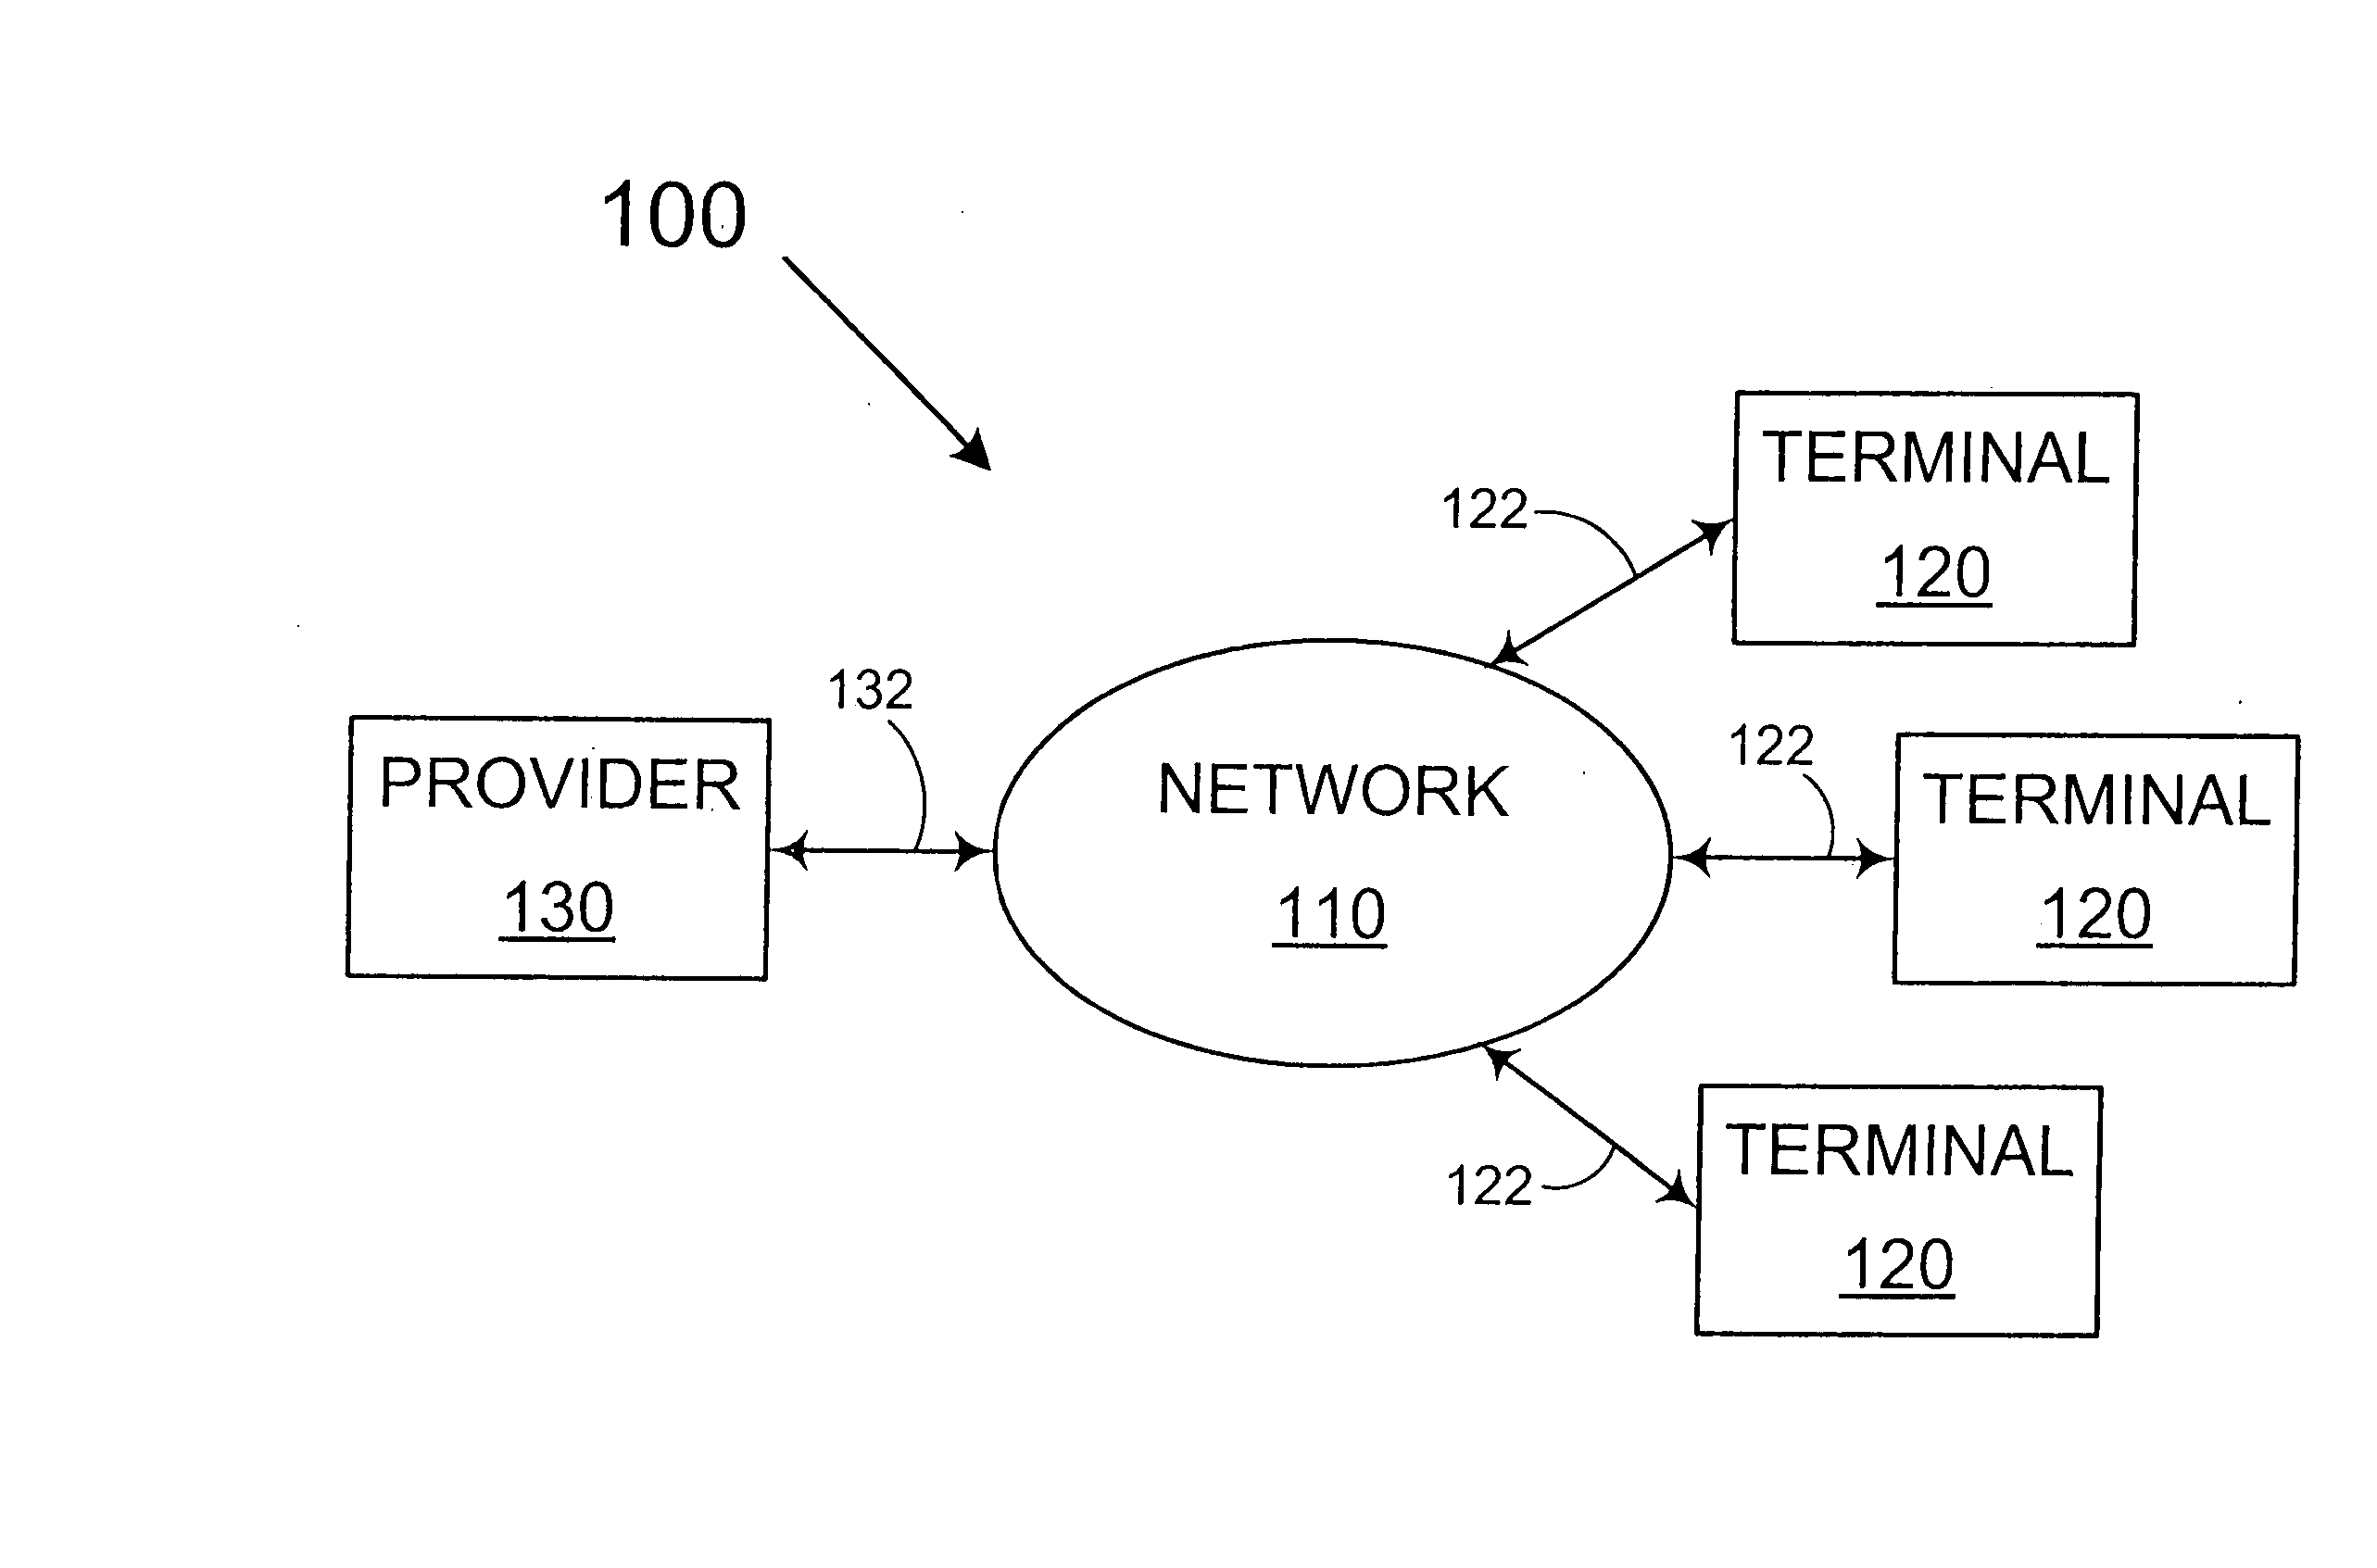 Computerized agent and systems for automatic searching of properties having favorable attributes